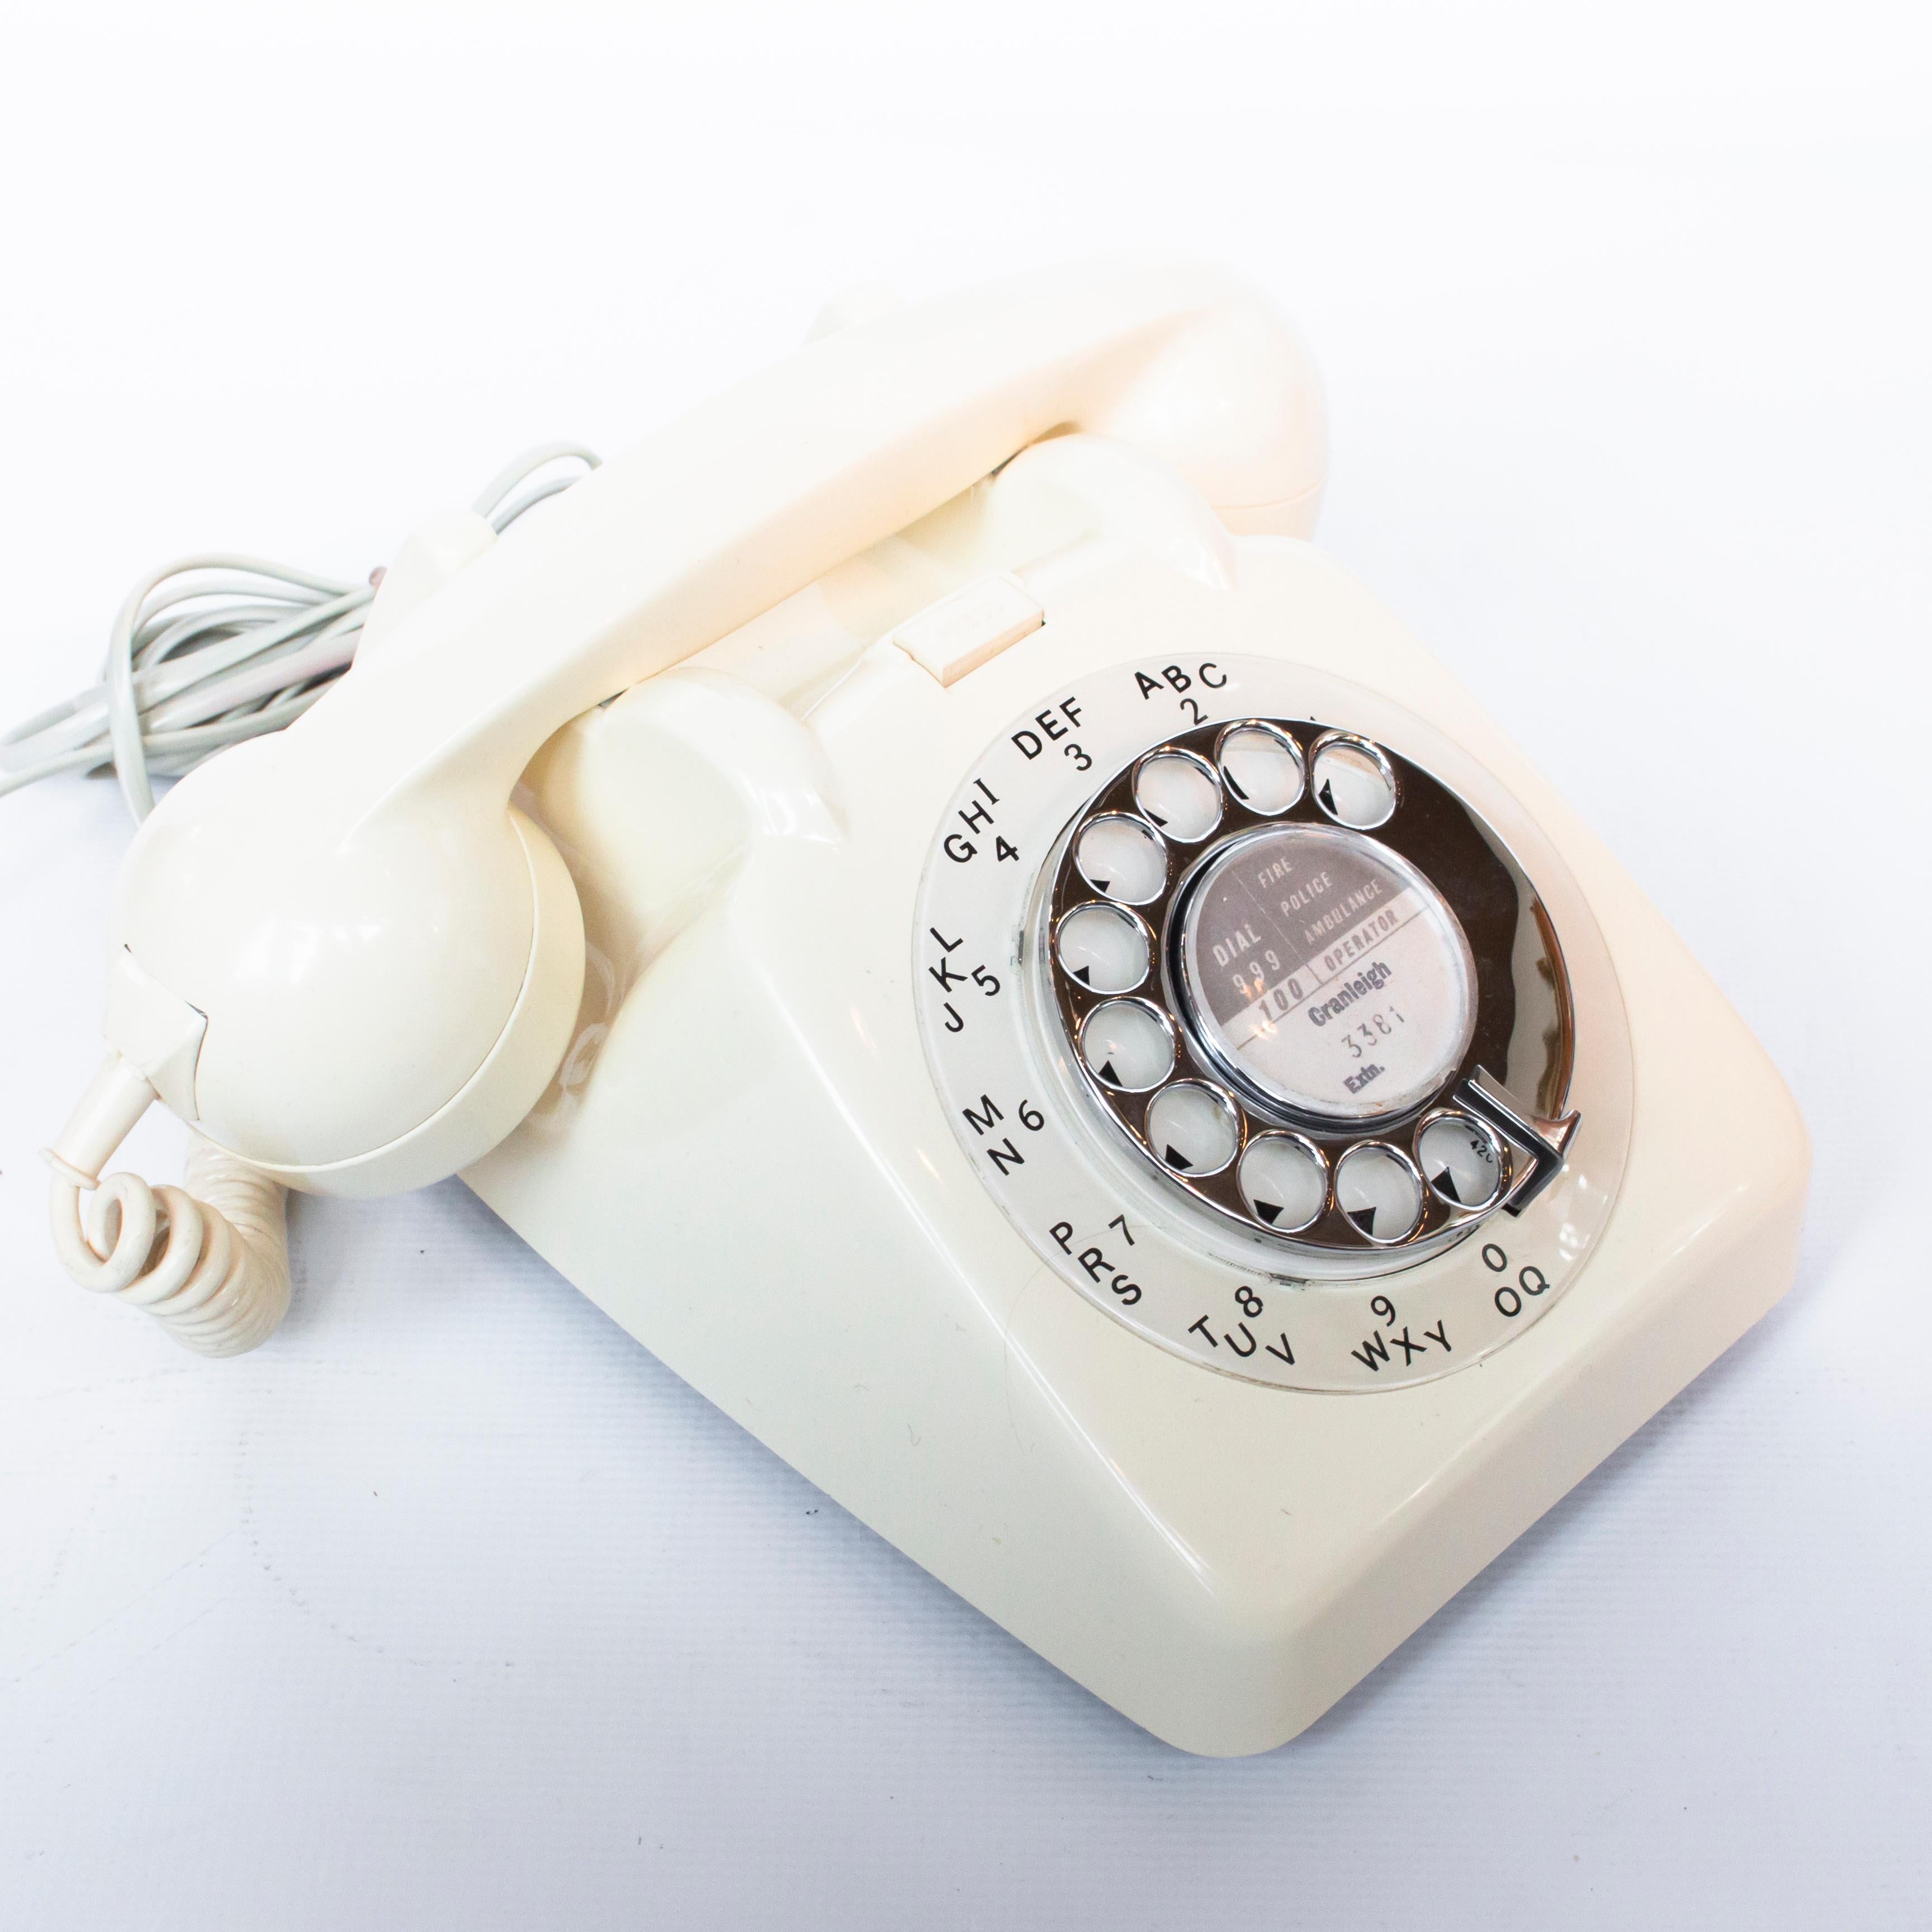 An original, 1967 GPO model 706 telephone in ivory. Original nylon carrying handle (not for carrying). Fully refurbished.

Dimensions: H 14.5 cm, W 22 cm, D 10 cm

Origin: English

Date: circa 1960

Item no: 1802202.